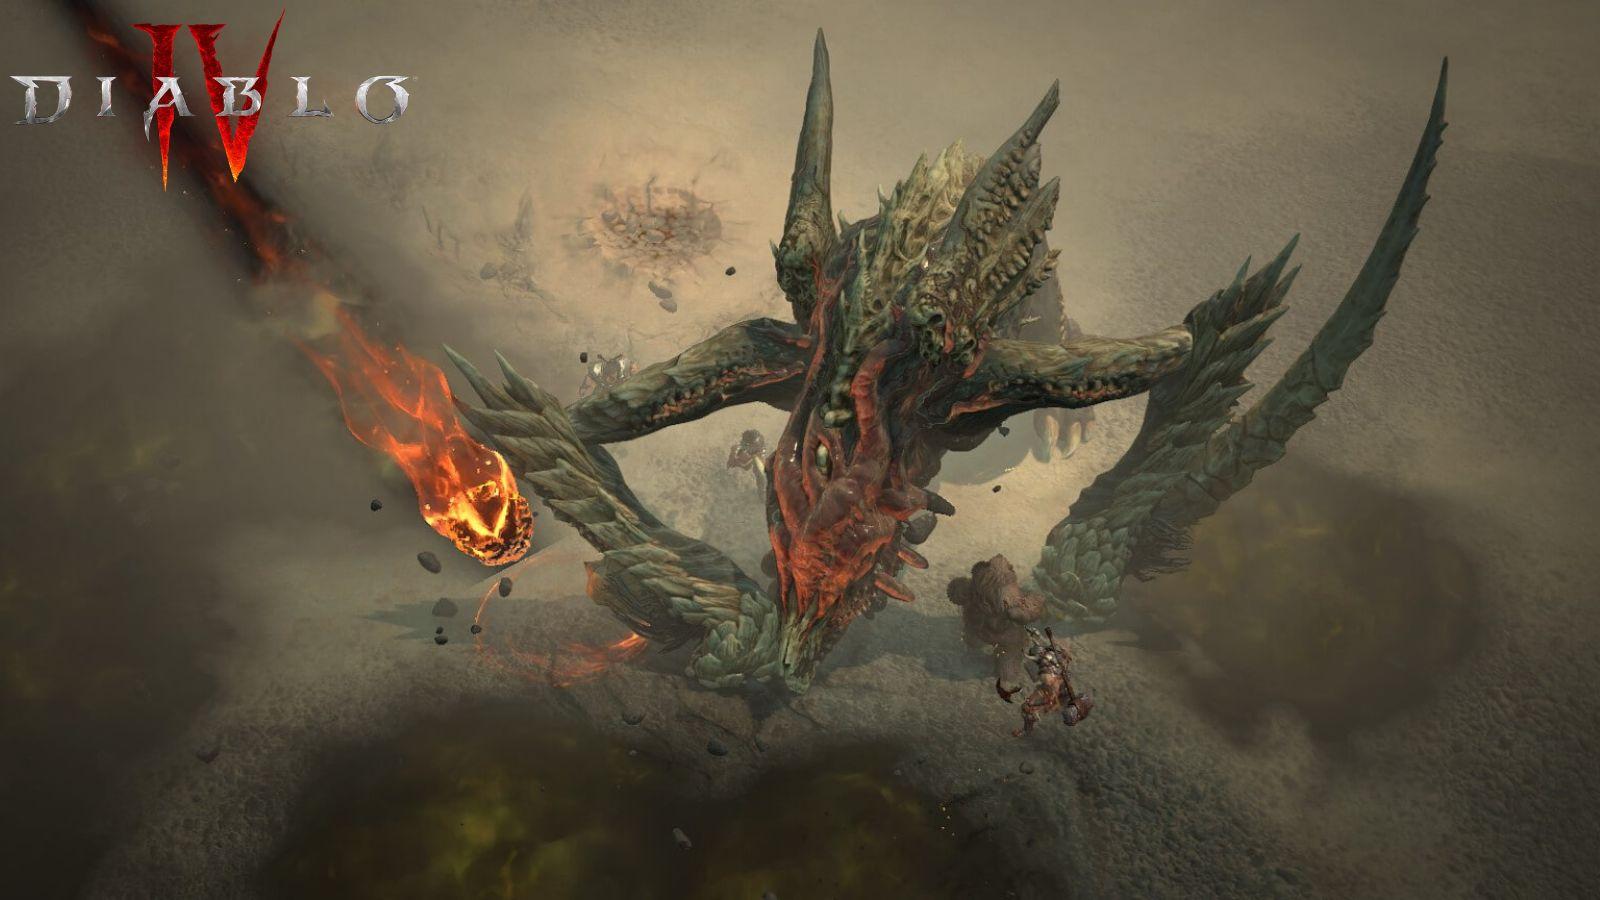 Diablo 4 players agree there's one major issue with world bosses